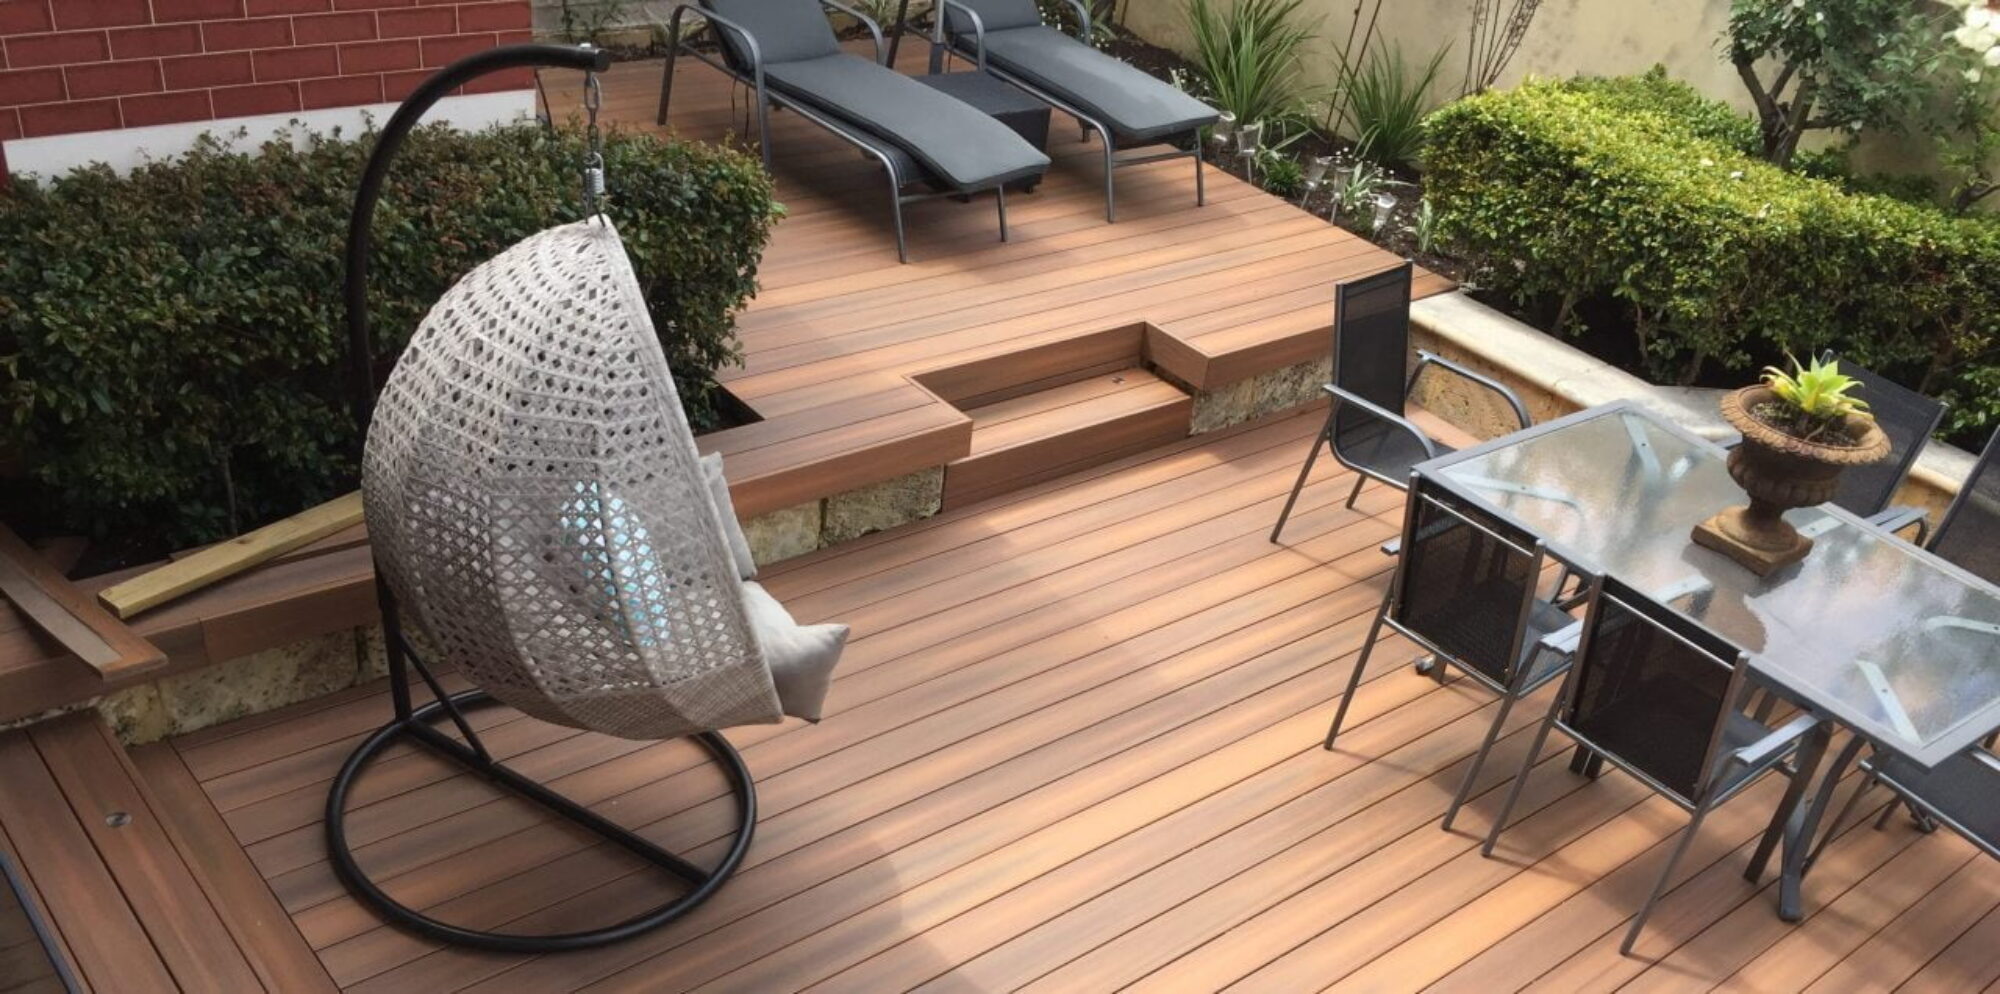 Get Yourself and Your Deck Ready For a Summer Party